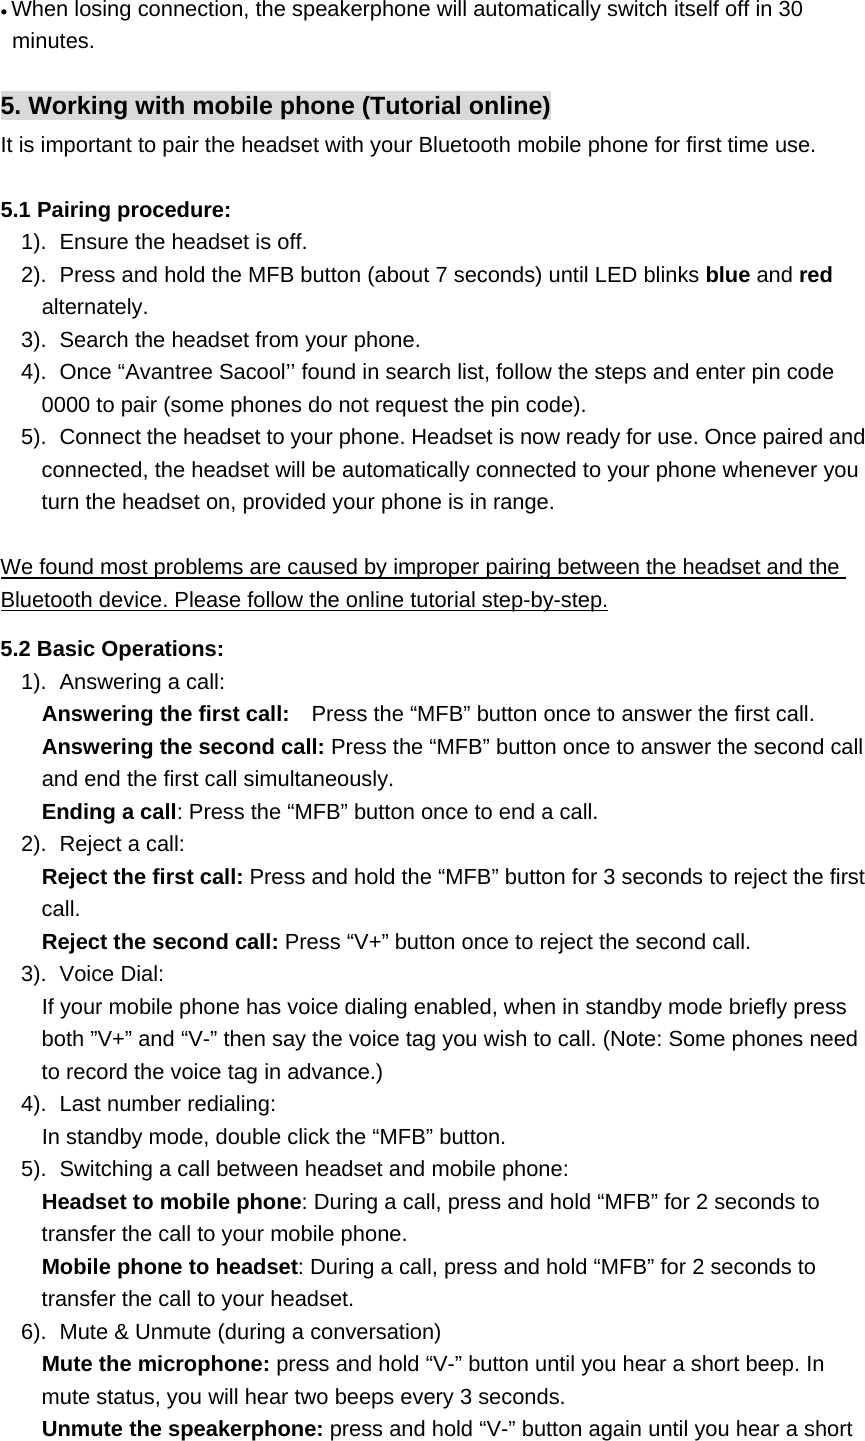 • When losing connection, the speakerphone will automatically switch itself off in 30 minutes.  5. Working with mobile phone (Tutorial online) It is important to pair the headset with your Bluetooth mobile phone for first time use.    5.1 Pairing procedure:   1).  Ensure the headset is off. 2).  Press and hold the MFB button (about 7 seconds) until LED blinks blue and red alternately. 3).  Search the headset from your phone. 4).  Once “Avantree Sacool’’ found in search list, follow the steps and enter pin code 0000 to pair (some phones do not request the pin code). 5).  Connect the headset to your phone. Headset is now ready for use. Once paired and connected, the headset will be automatically connected to your phone whenever you turn the headset on, provided your phone is in range.  We found most problems are caused by improper pairing between the headset and the Bluetooth device. Please follow the online tutorial step-by-step.  5.2 Basic Operations: 1). Answering a call:     Answering the first call:    Press the “MFB” button once to answer the first call.    Answering the second call: Press the “MFB” button once to answer the second call and end the first call simultaneously.    Ending a call: Press the “MFB” button once to end a call. 2).  Reject a call:    Reject the first call: Press and hold the “MFB” button for 3 seconds to reject the first call.    Reject the second call: Press “V+” button once to reject the second call. 3). Voice Dial:     If your mobile phone has voice dialing enabled, when in standby mode briefly press both ”V+” and “V-” then say the voice tag you wish to call. (Note: Some phones need to record the voice tag in advance.) 4).  Last number redialing:      In standby mode, double click the “MFB” button. 5).  Switching a call between headset and mobile phone:    Headset to mobile phone: During a call, press and hold “MFB” for 2 seconds to transfer the call to your mobile phone.    Mobile phone to headset: During a call, press and hold “MFB” for 2 seconds to transfer the call to your headset. 6).  Mute &amp; Unmute (during a conversation)        Mute the microphone: press and hold “V-” button until you hear a short beep. In mute status, you will hear two beeps every 3 seconds.    Unmute the speakerphone: press and hold “V-” button again until you hear a short 